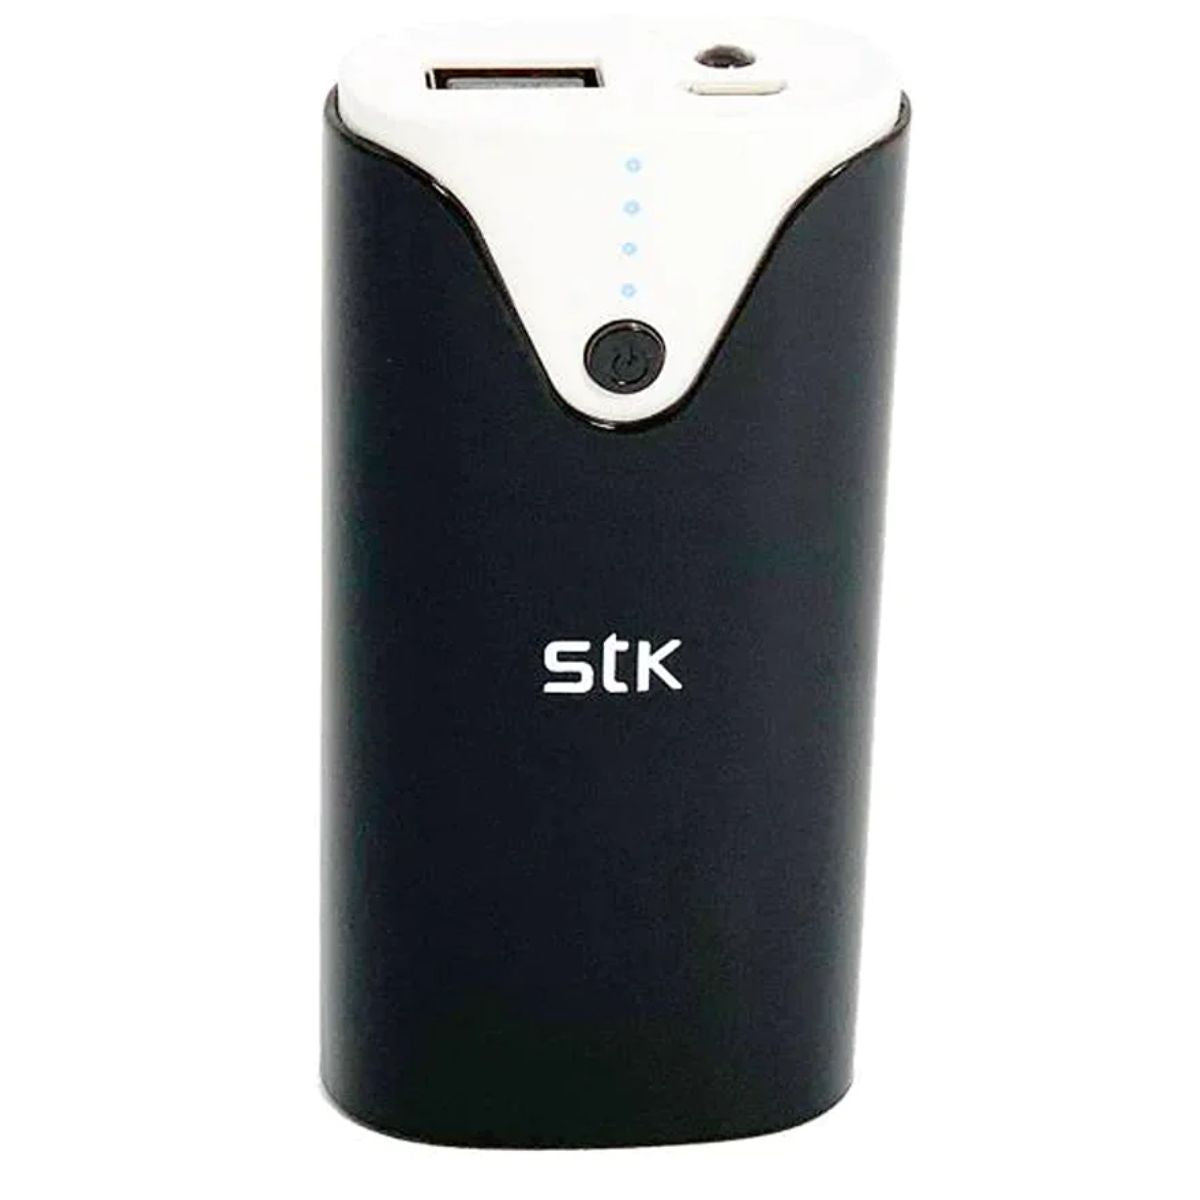 Black STK - Power Box - 4000mAh power bank with LED indicators and a single button on a white background.